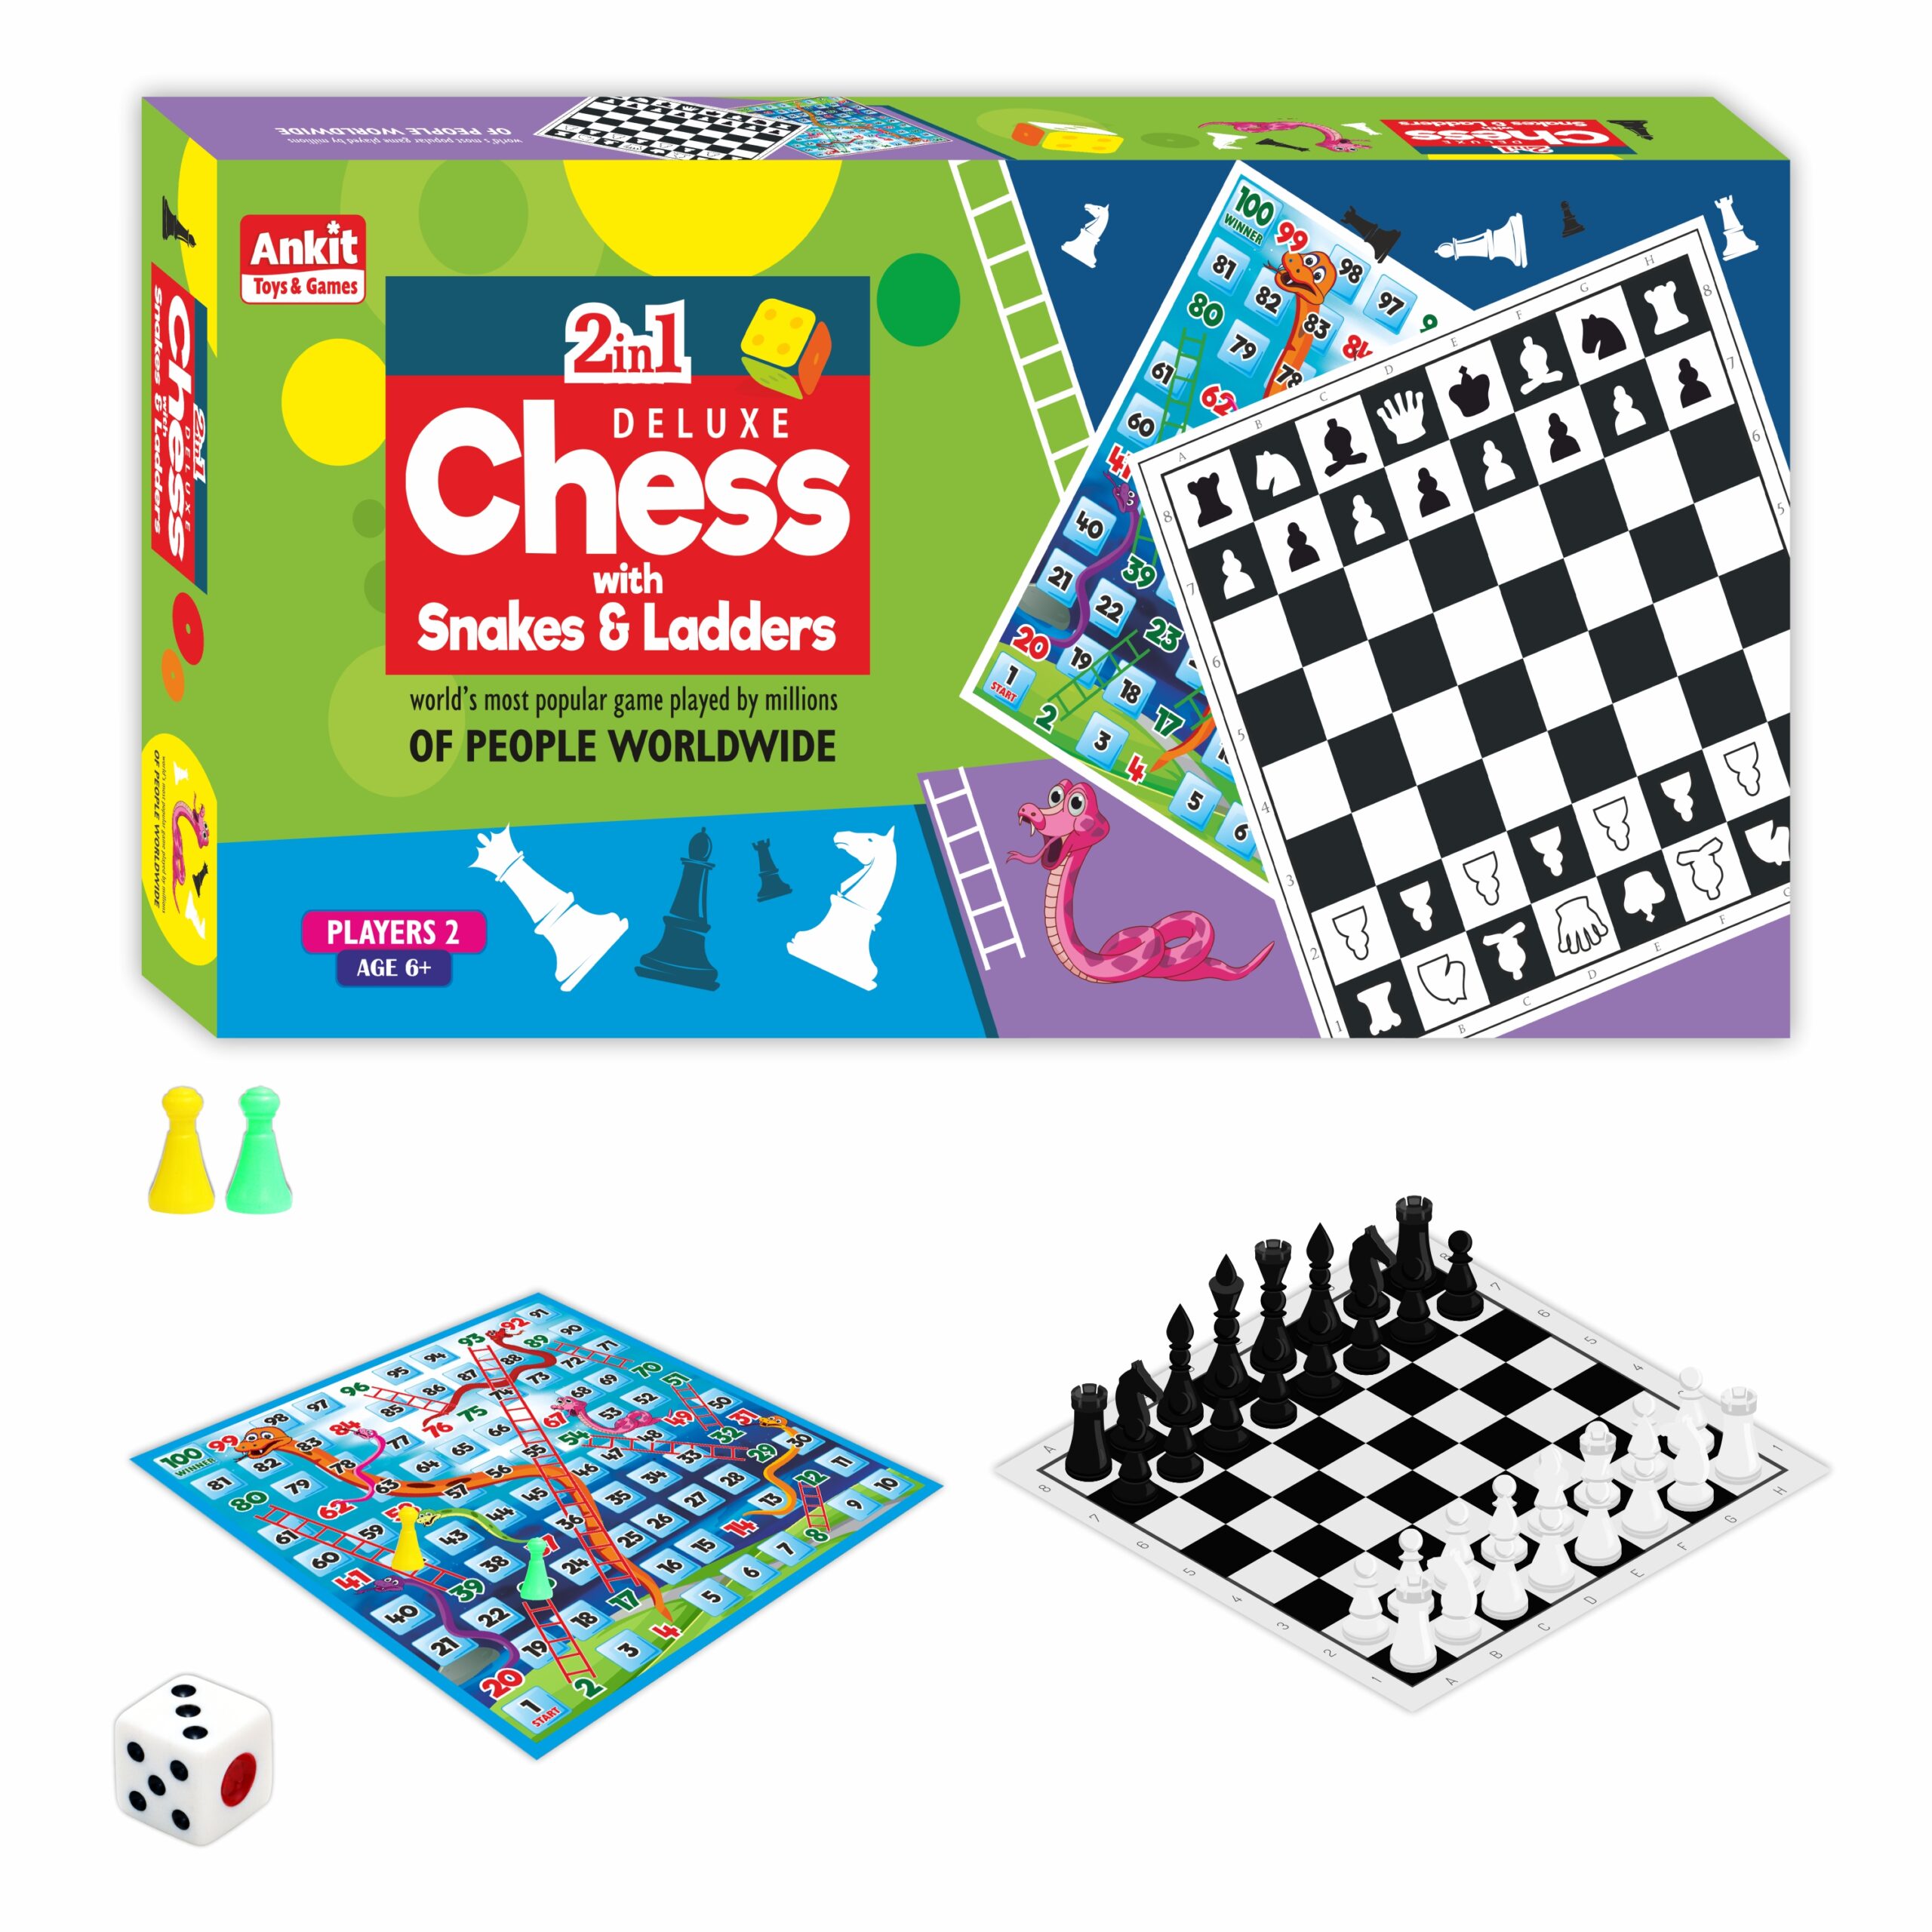 Ankit Toys 2 In 1 Chess with Snakes & ladders Board Game - Multicolor